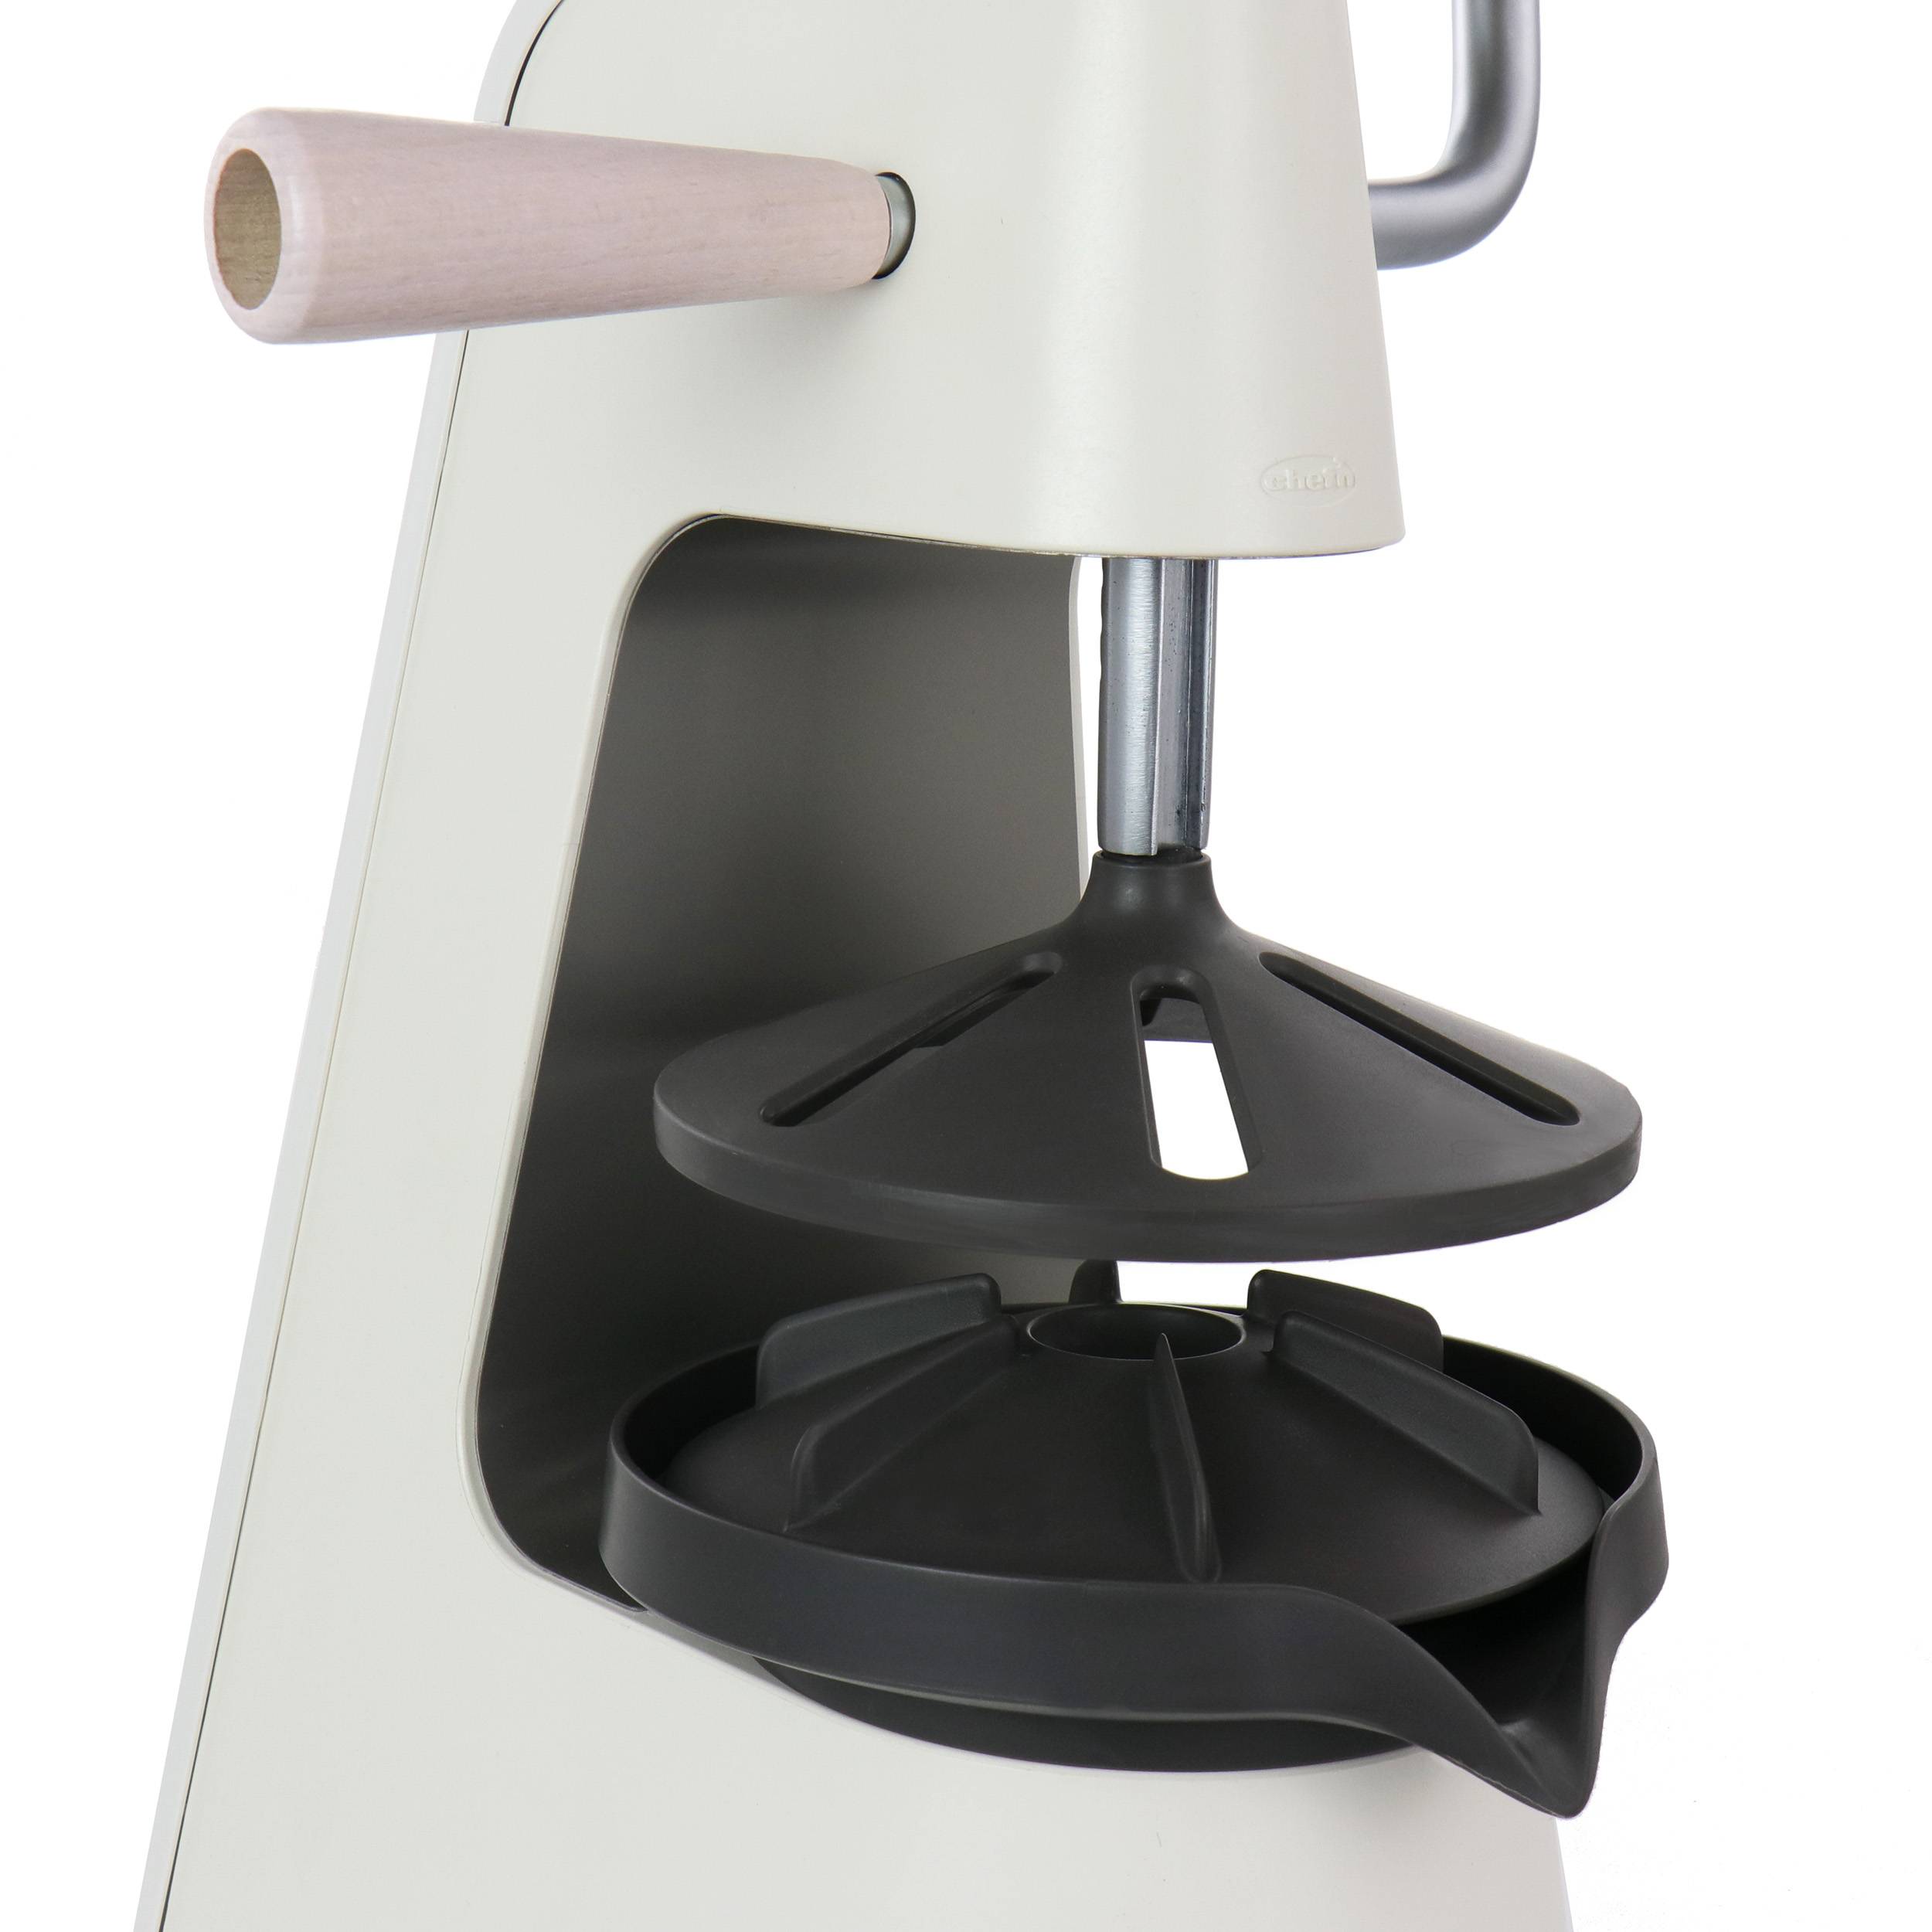 The Pampered Chef #2305 White Manual Juicer for sale online